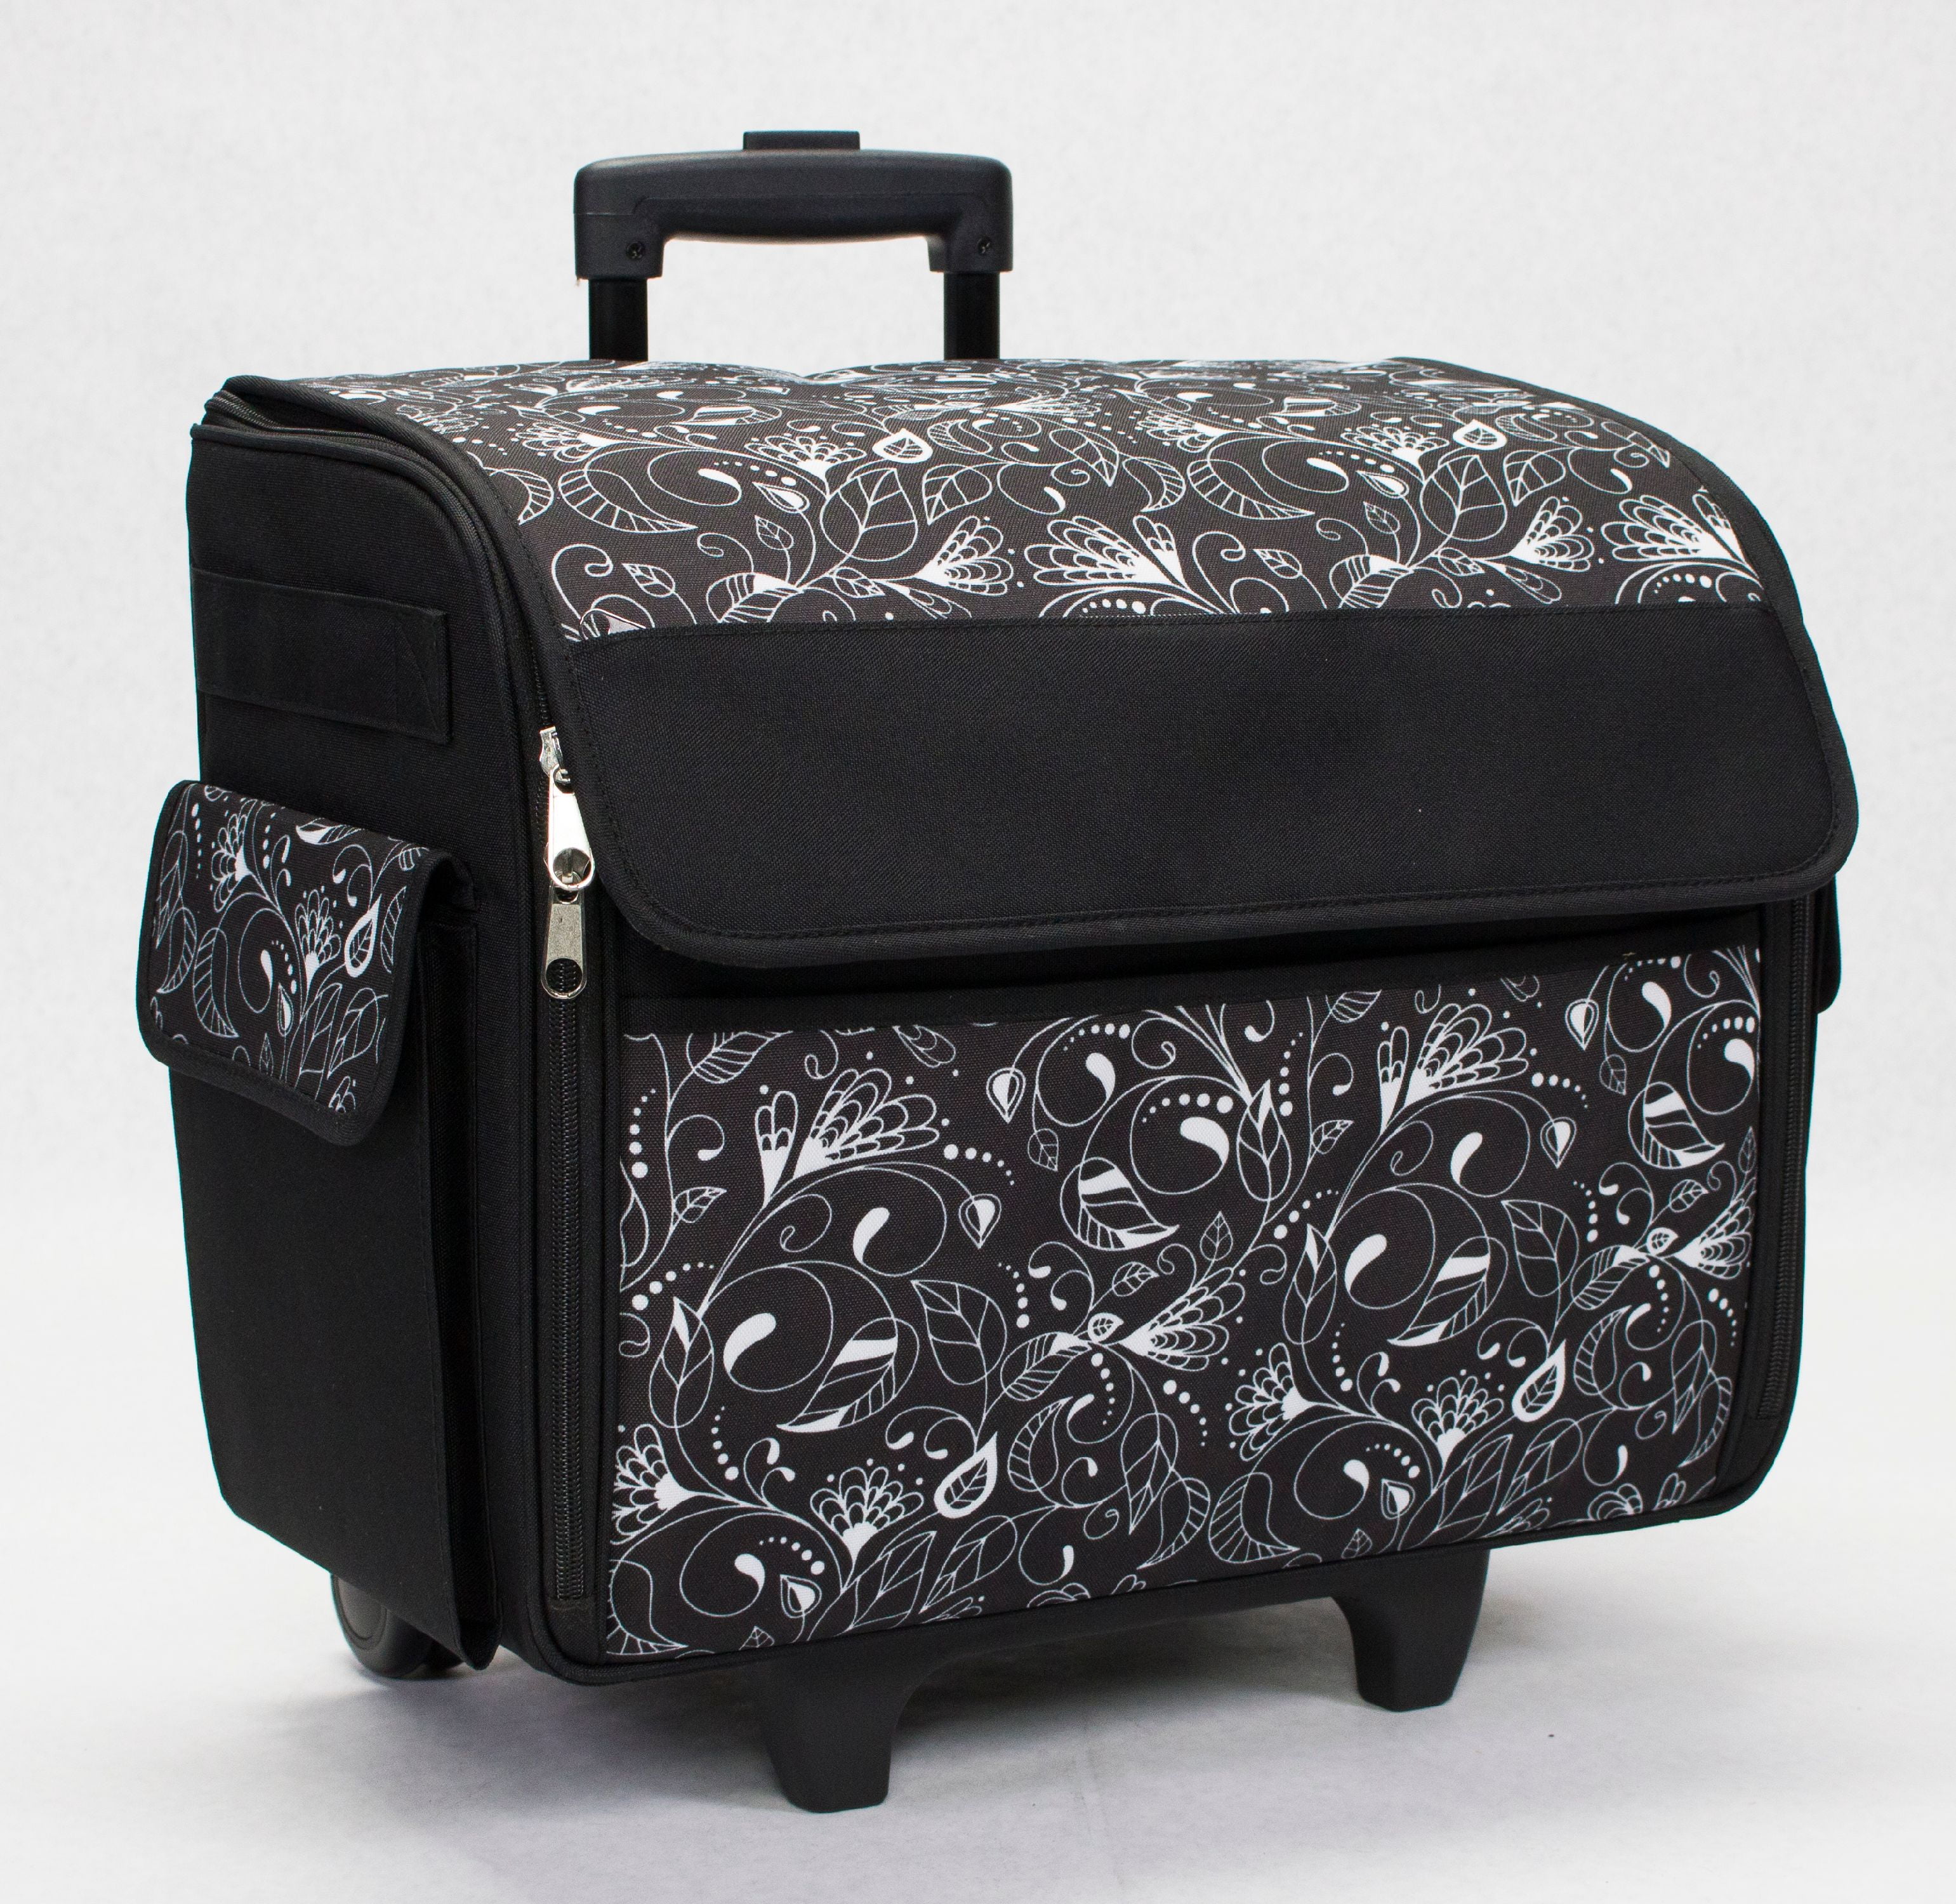 Everything Mary Rolling Sewing Machine Tote - Bed Bath & Beyond - 8239176